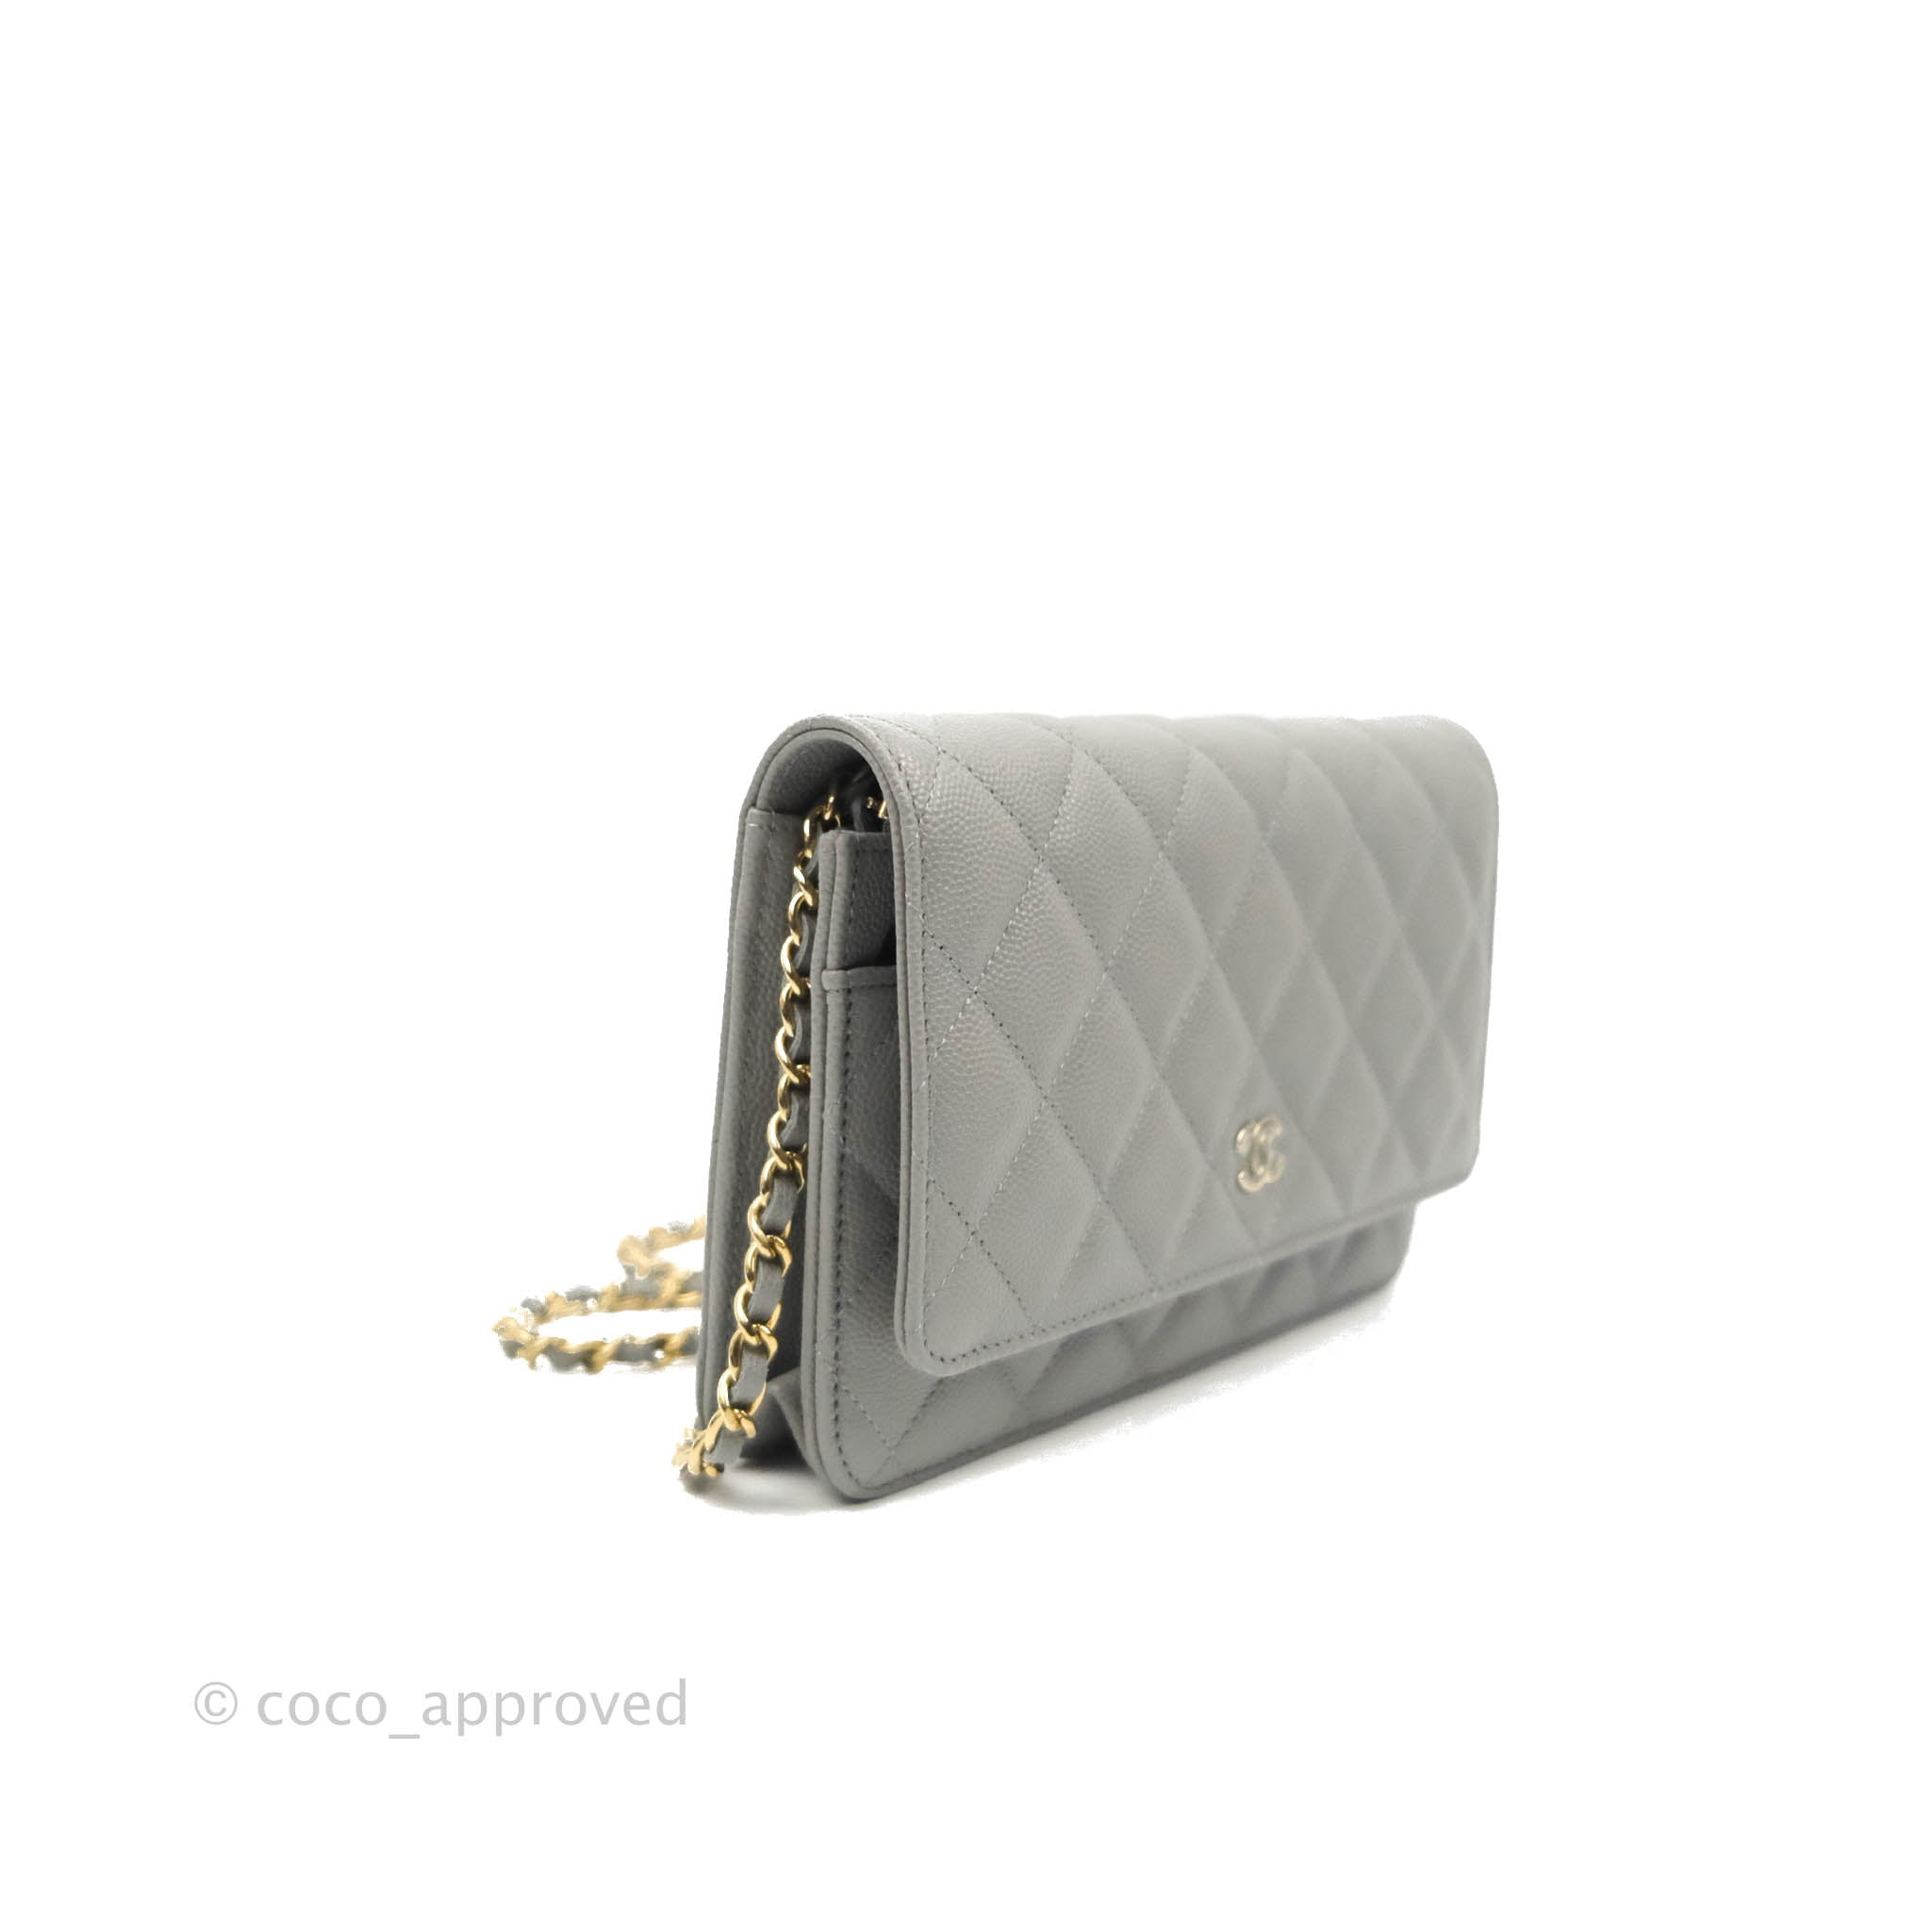 chanel grey wallet on chain